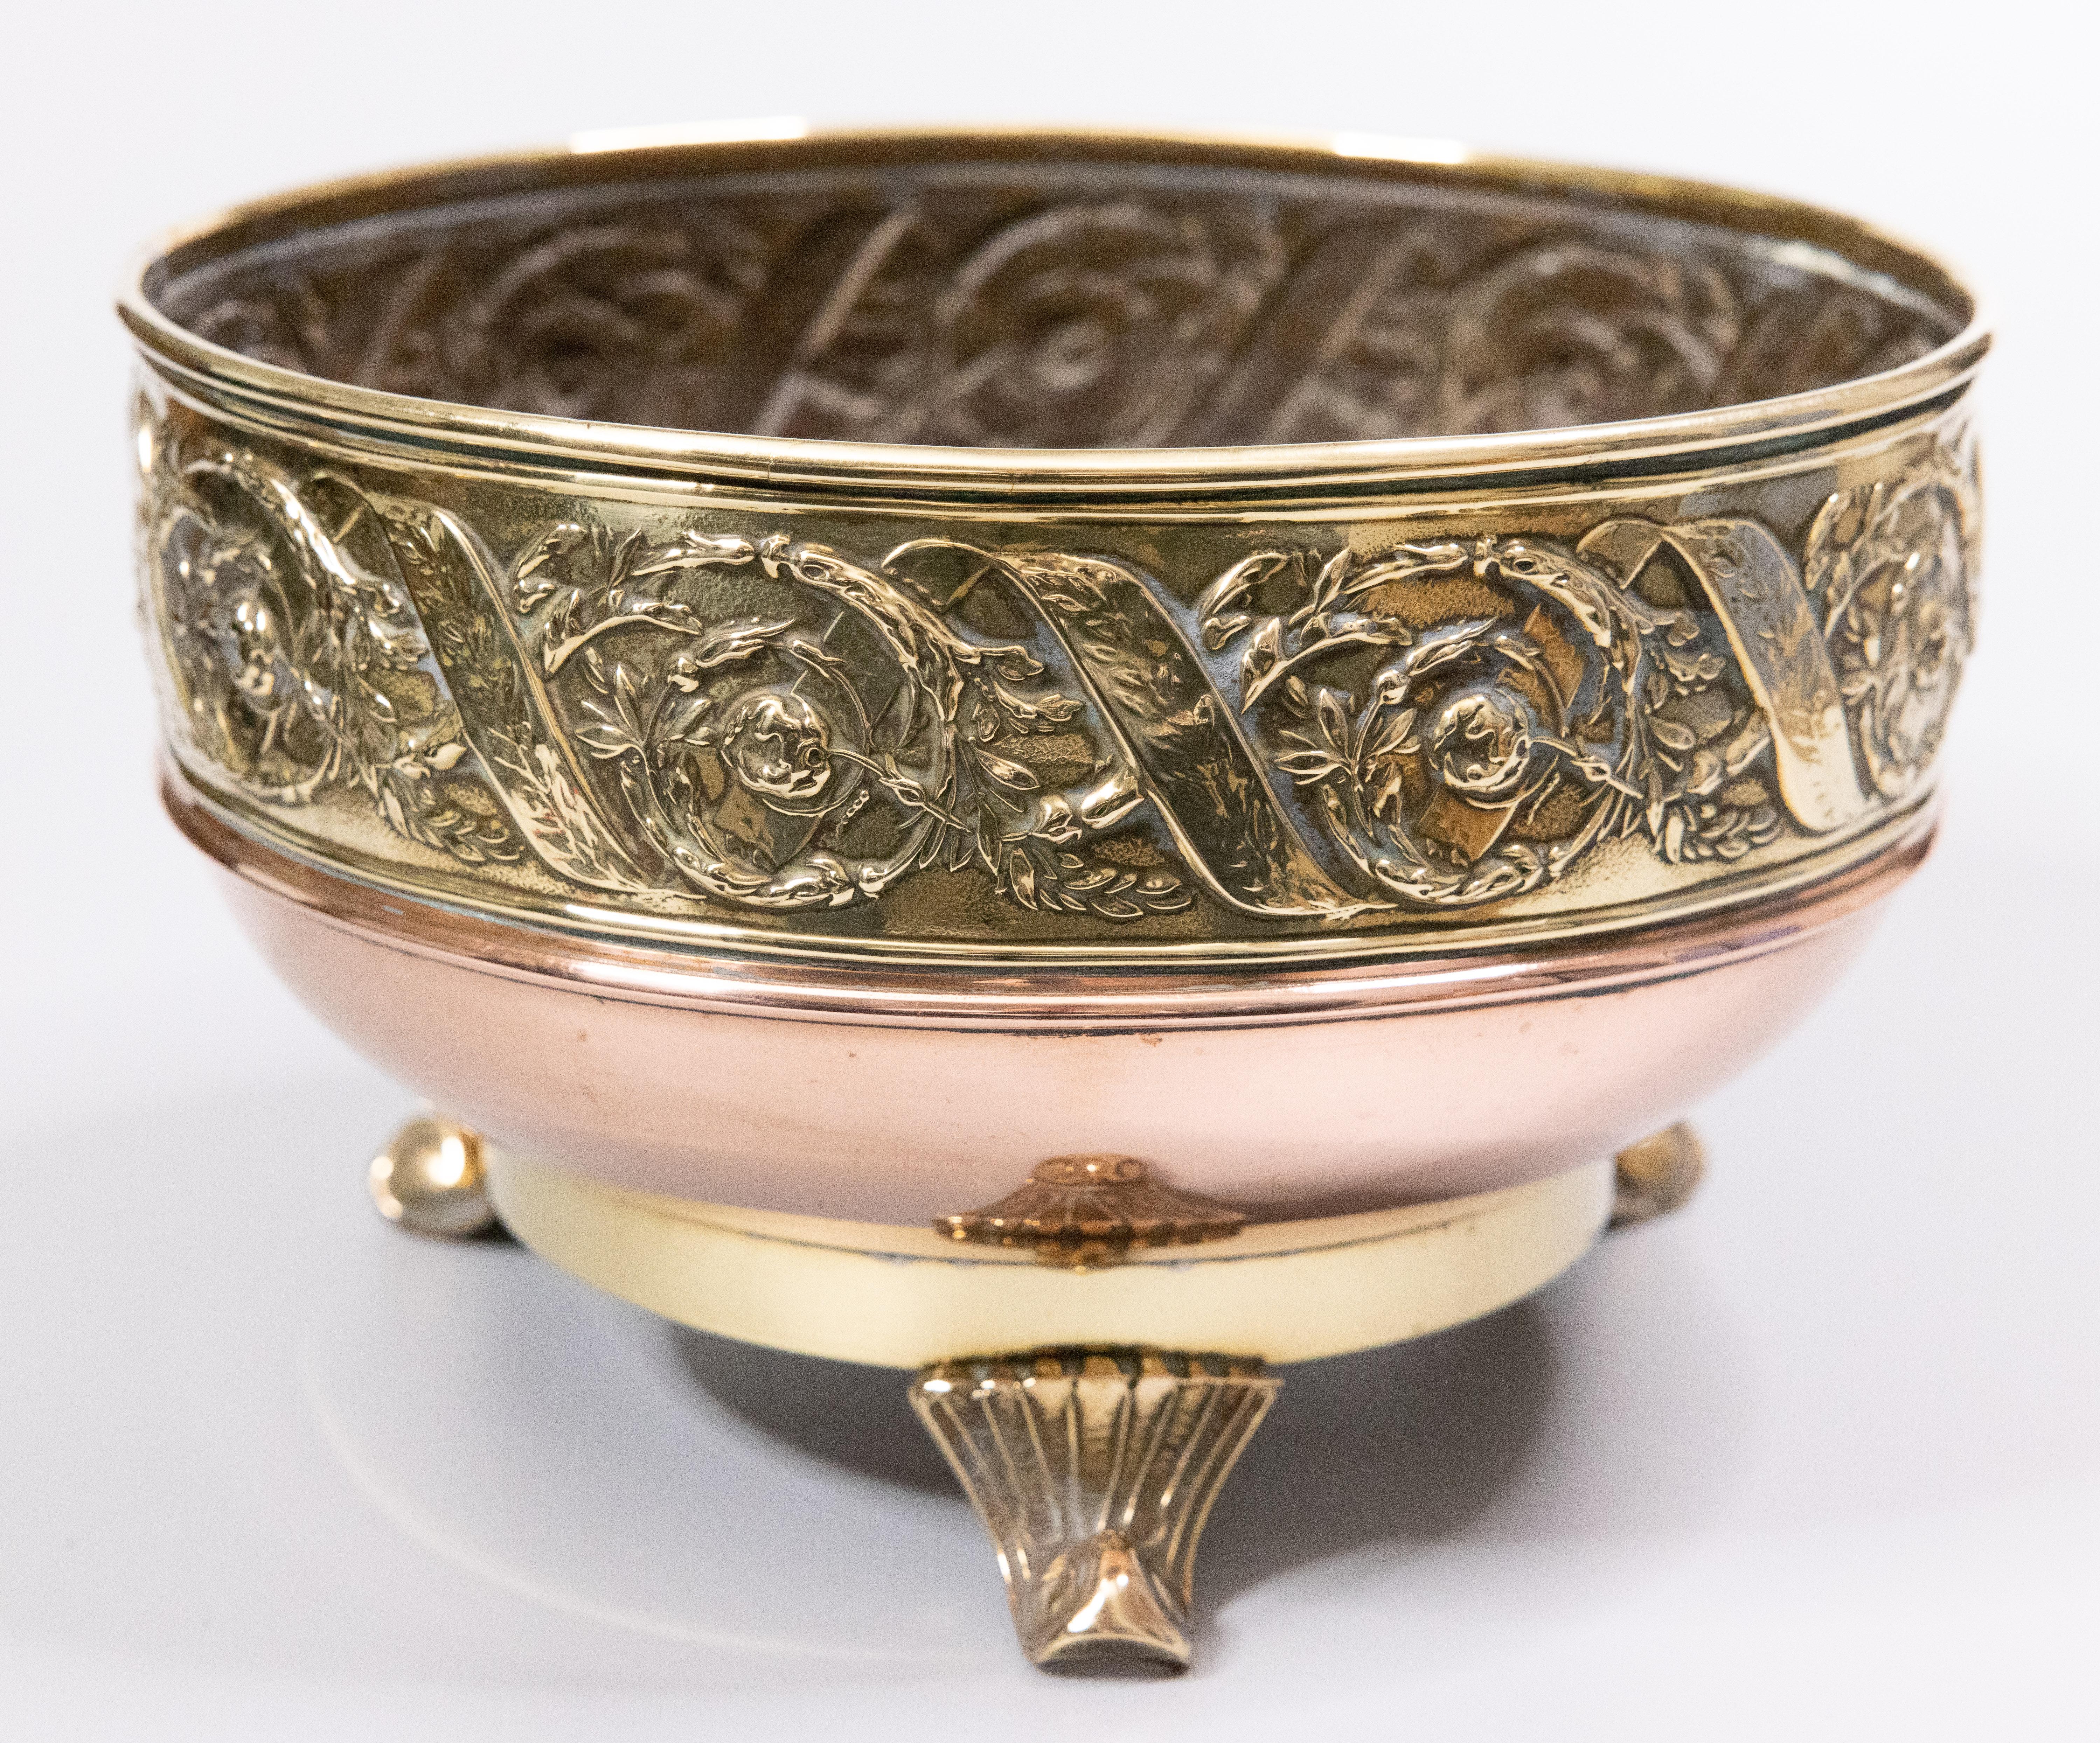 A gorgeous antique English brass and copper footed jardiniere / planter / cachepot / bowl, circa 1920. This fine pot is handcrafted of copper with a brass repoussé floral design and ornate brass feet. It would be lovely displayed on its own, filled